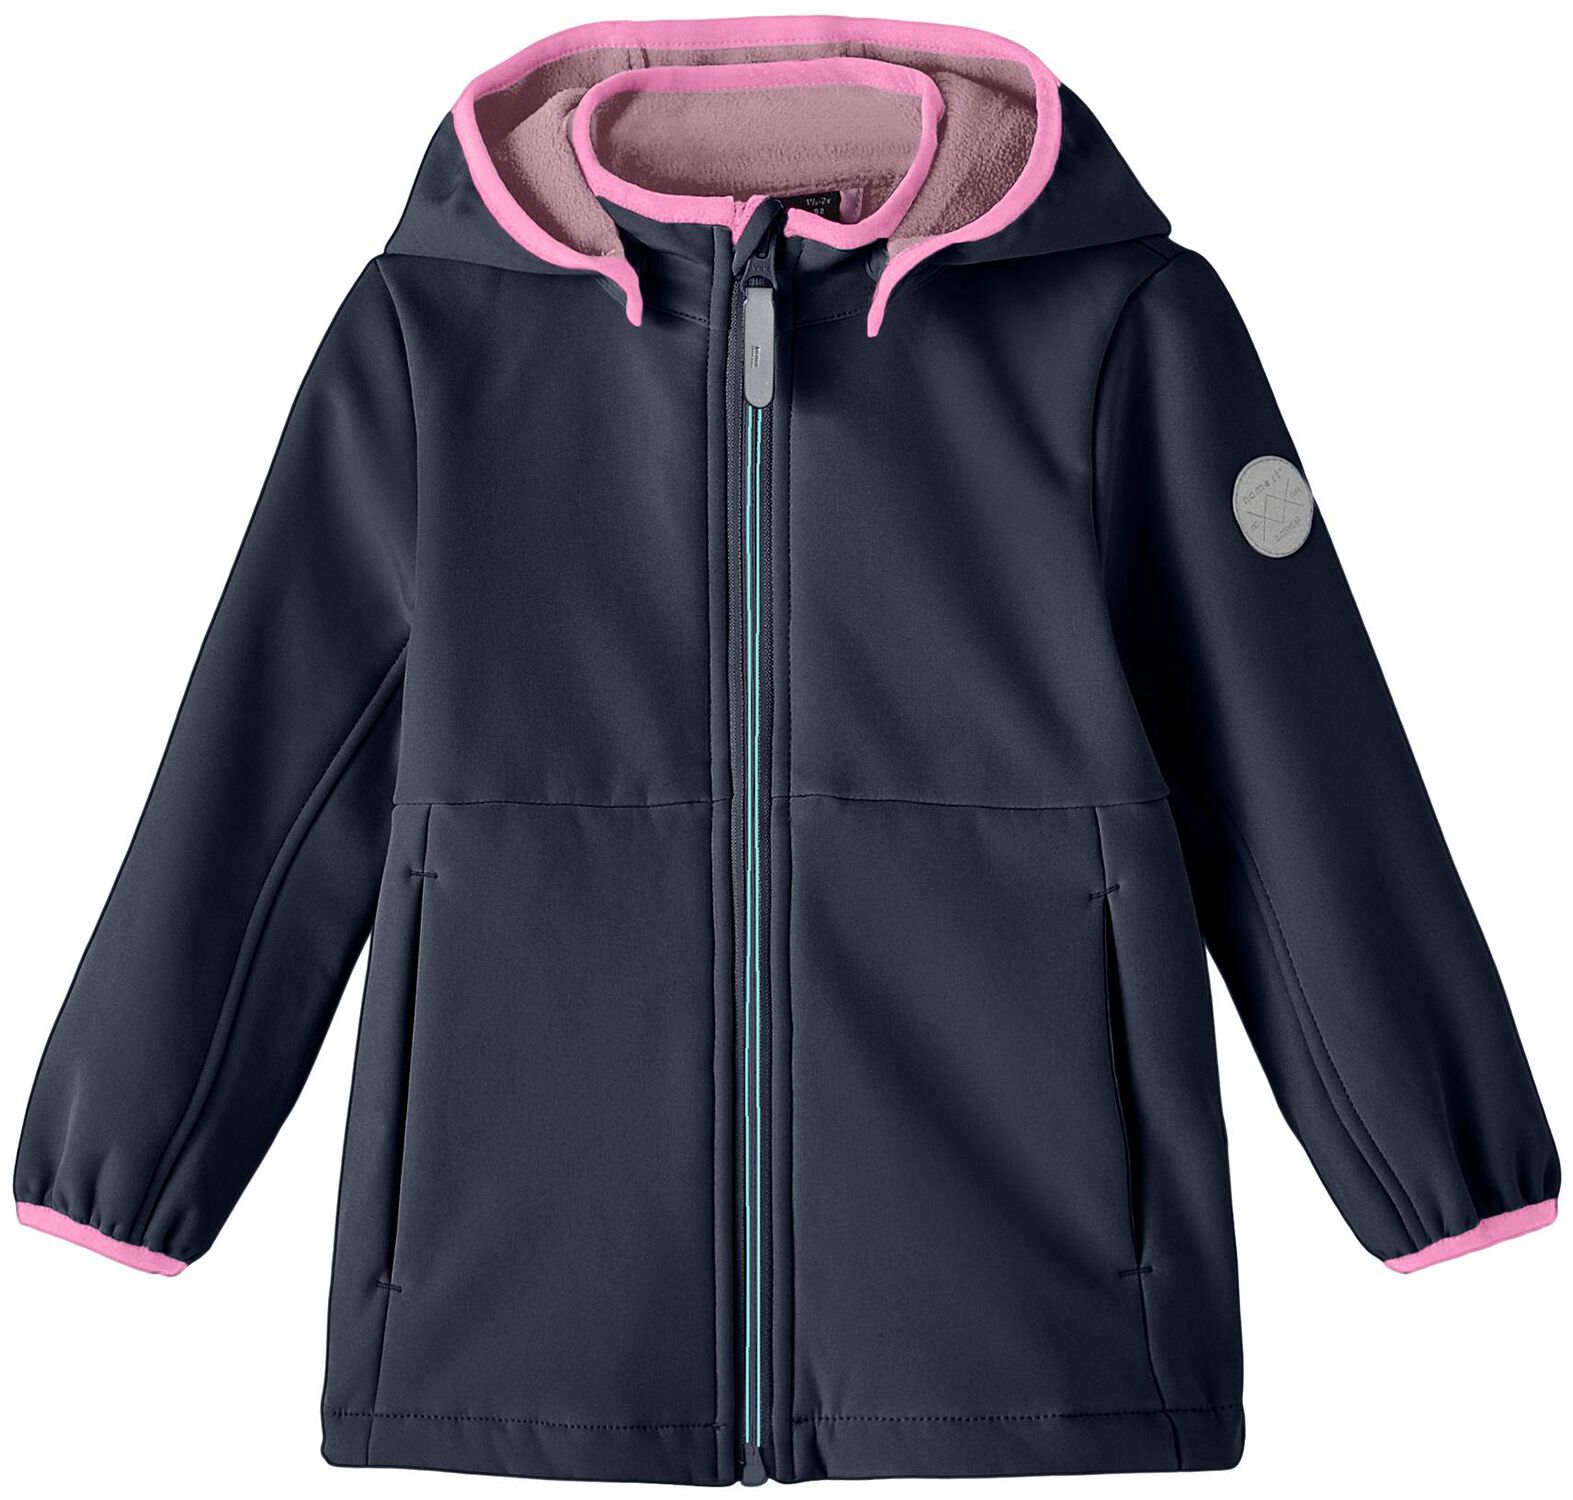 Image of Giacca di name it - Malta softshell jacket NOOS - 128 a 164 - ragazze - blu scuro